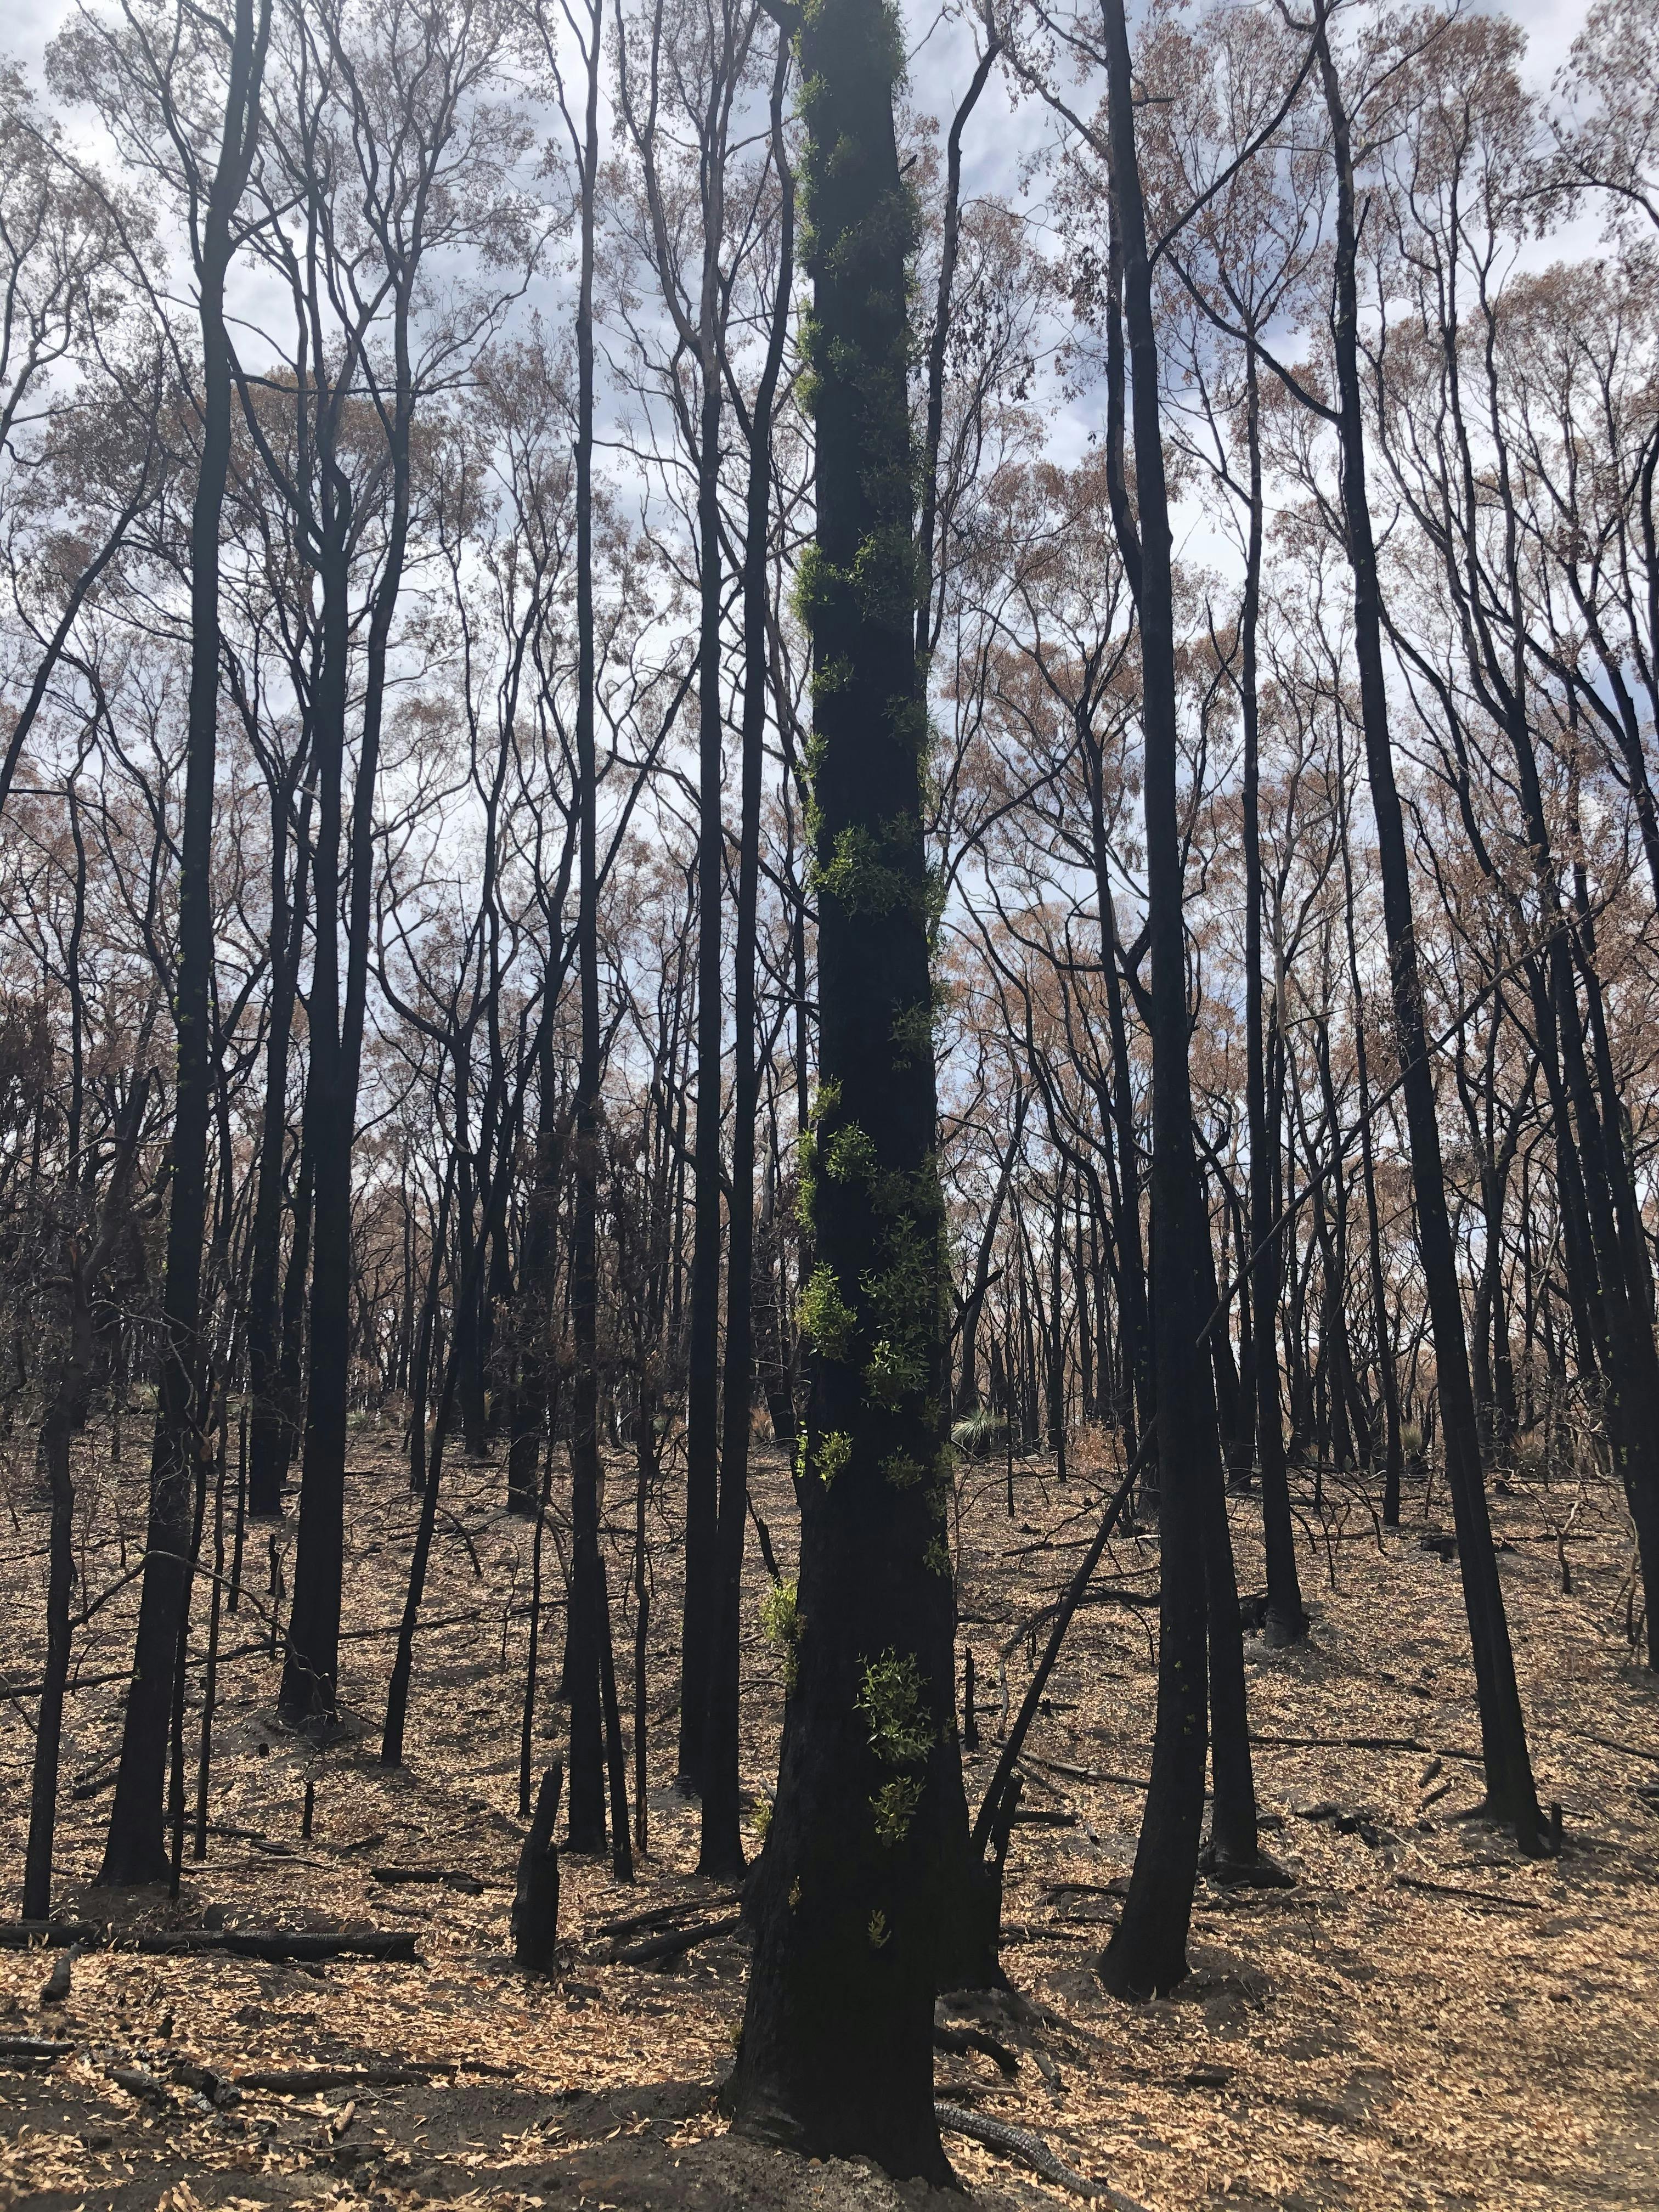 After the 2019 bushfire